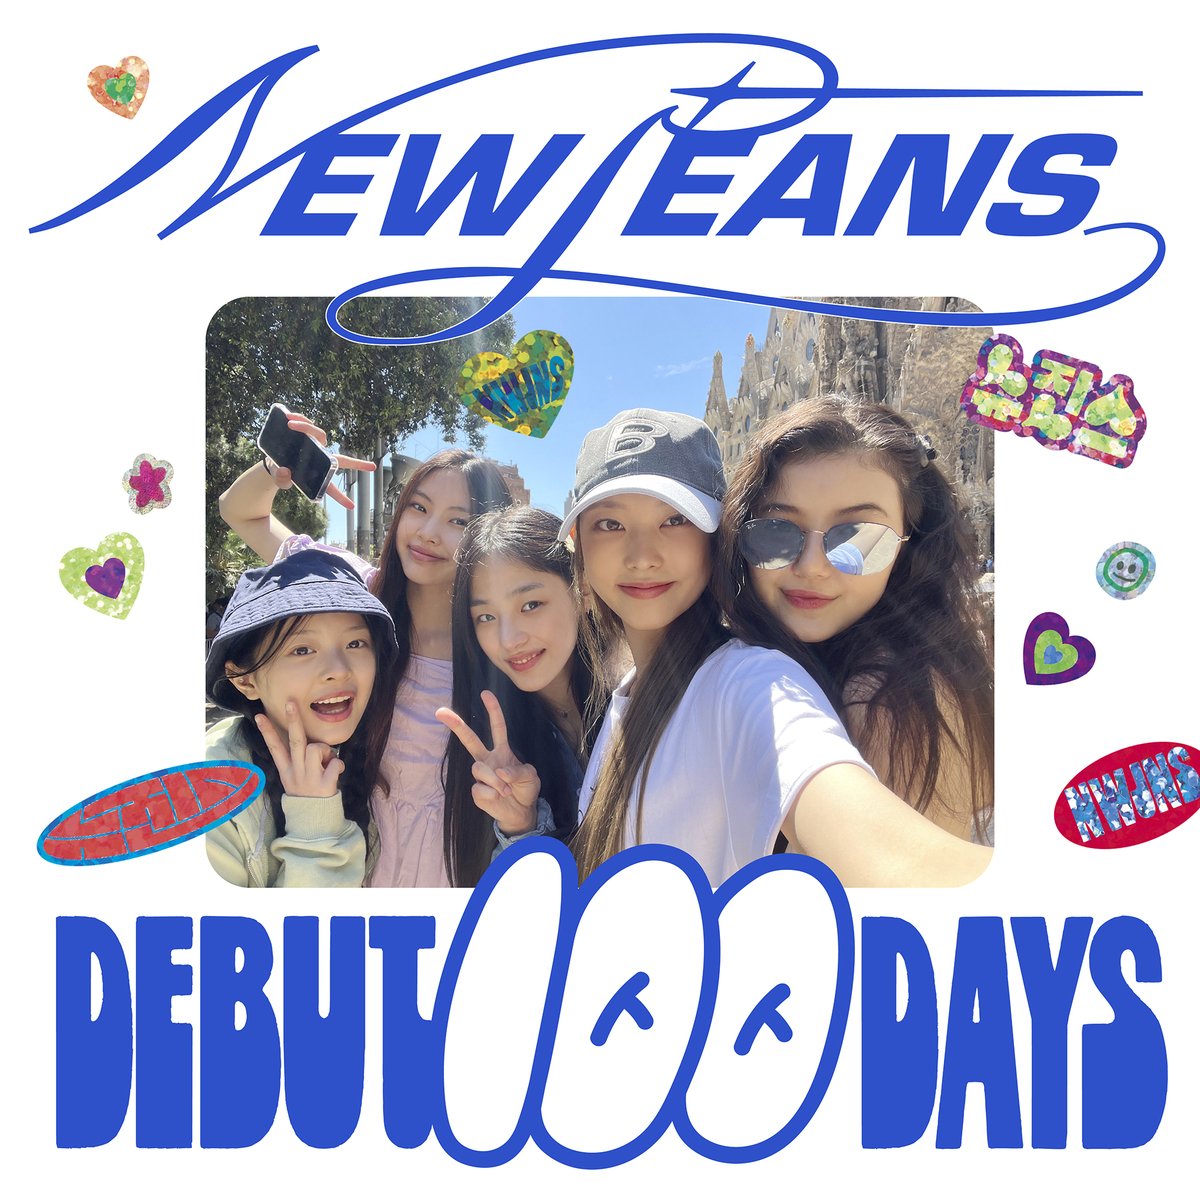 Image for 🐰NewJeans DEBUT 100 DAYS💕🎉 NewJeans 100DAYS_WITH_NewJeans WeAreNewJeans Debut 100 days https://t.co/tGrLDBgJP2